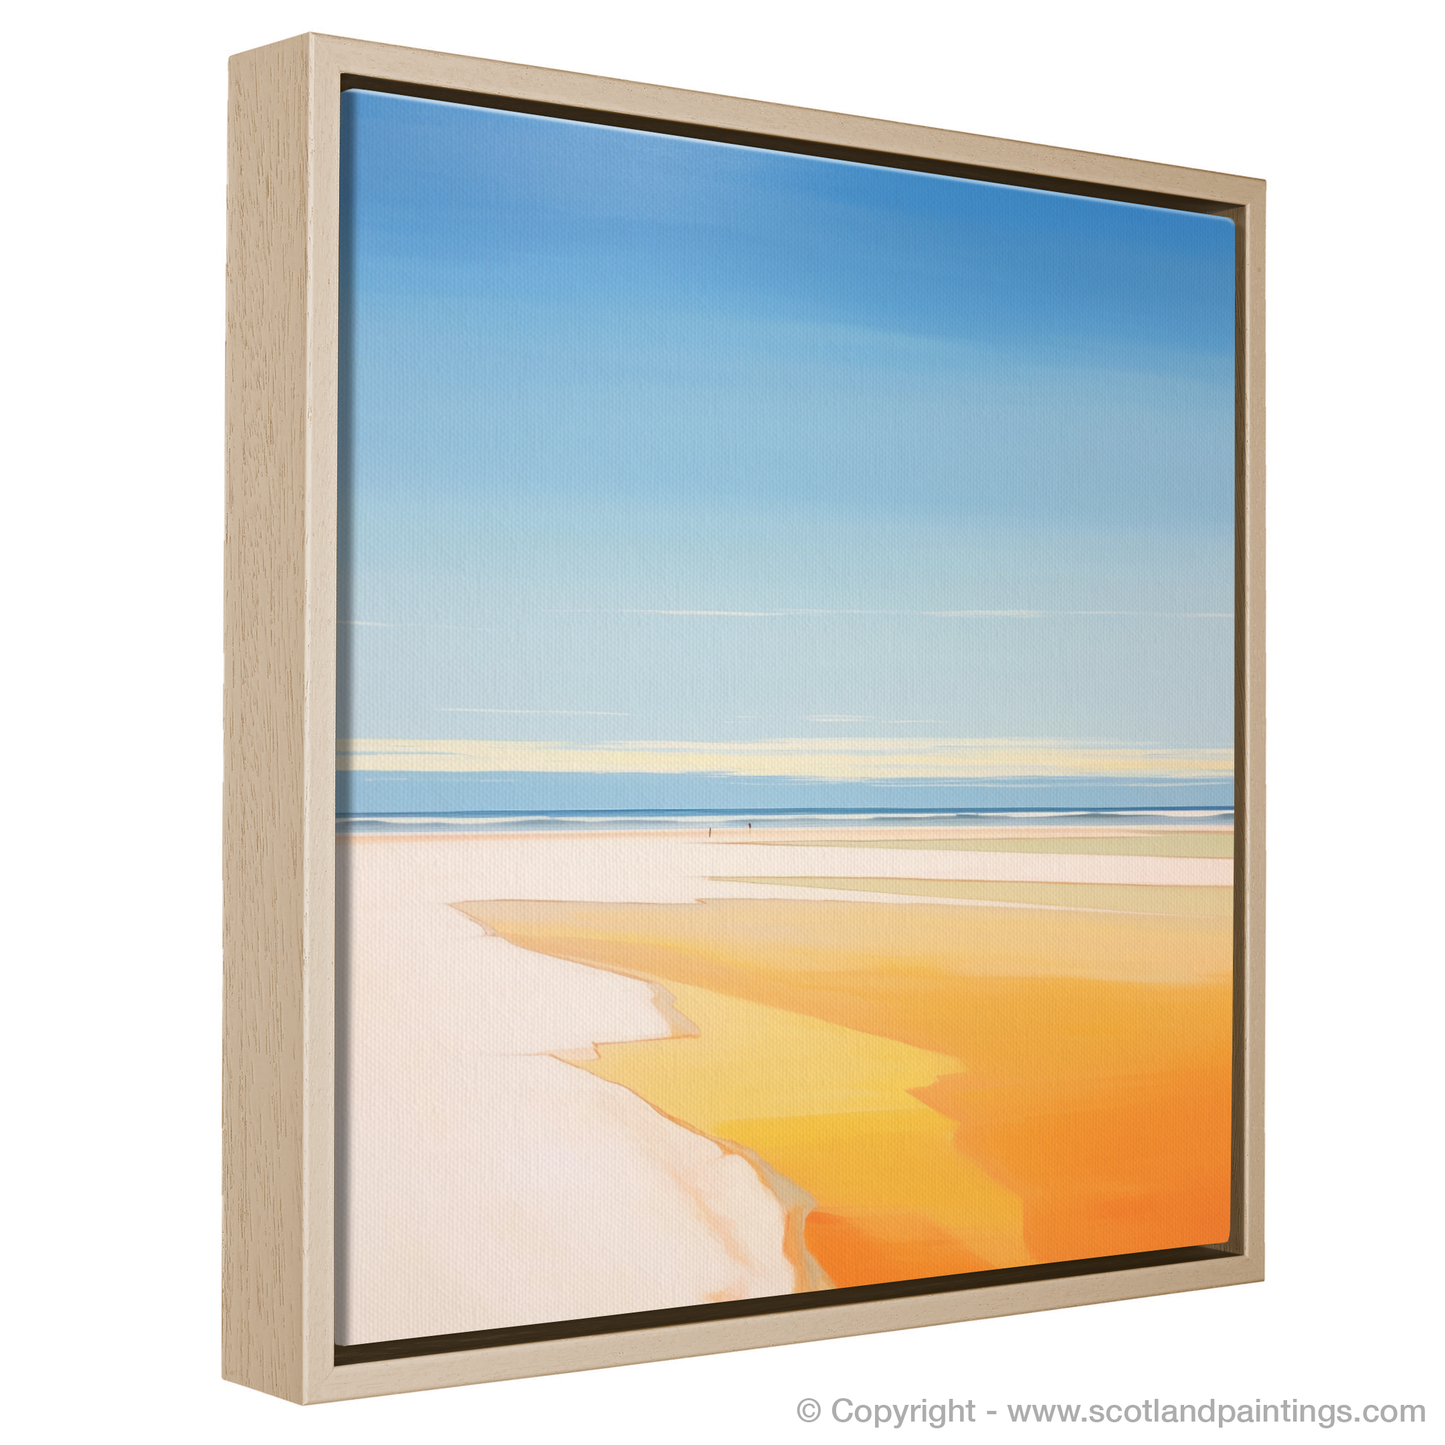 Golden Serenity: A Tribute to Nairn Beach at Dusk